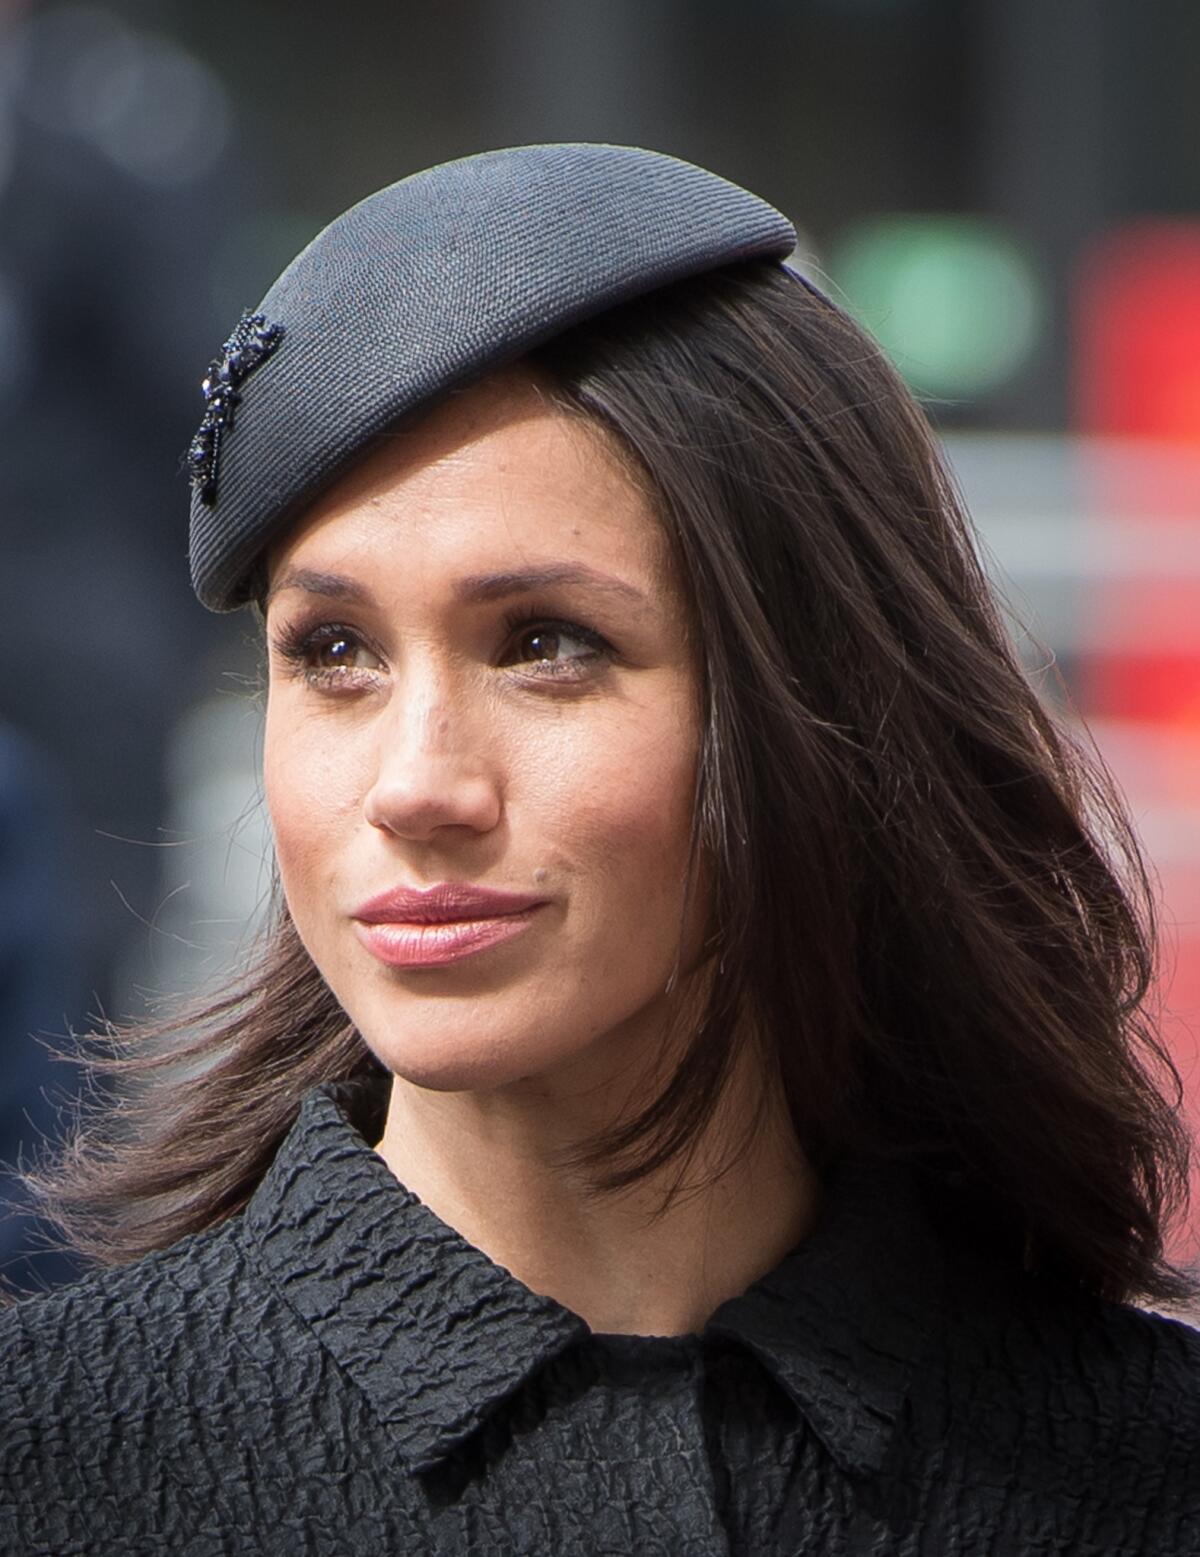 Meghan Markle attends the Anzac Day service at Westminster Abbey.